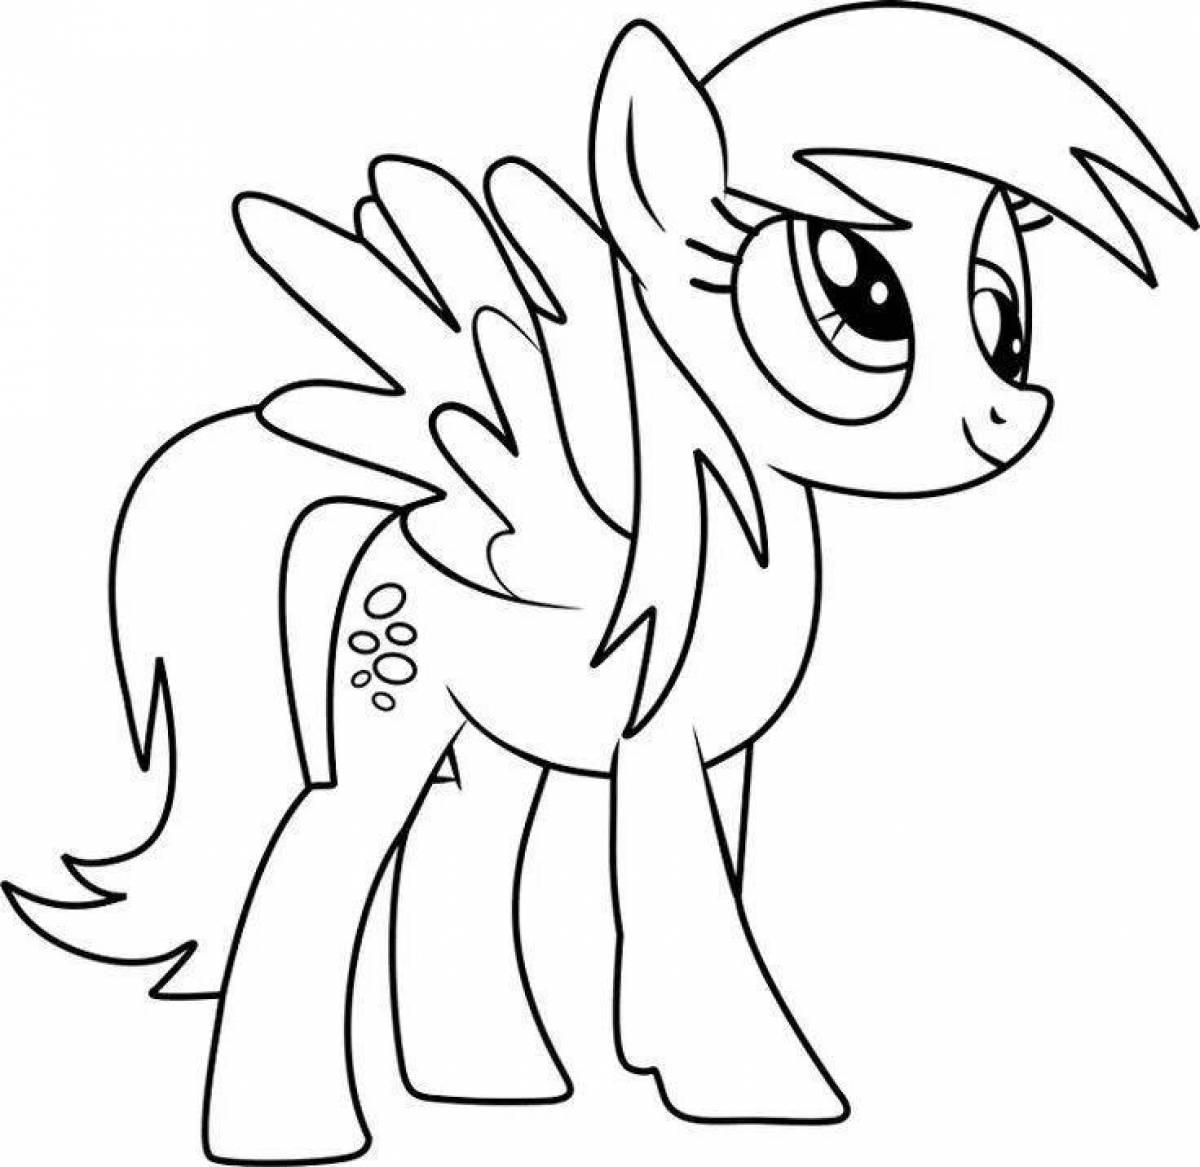 Radiant pony turn on coloring page